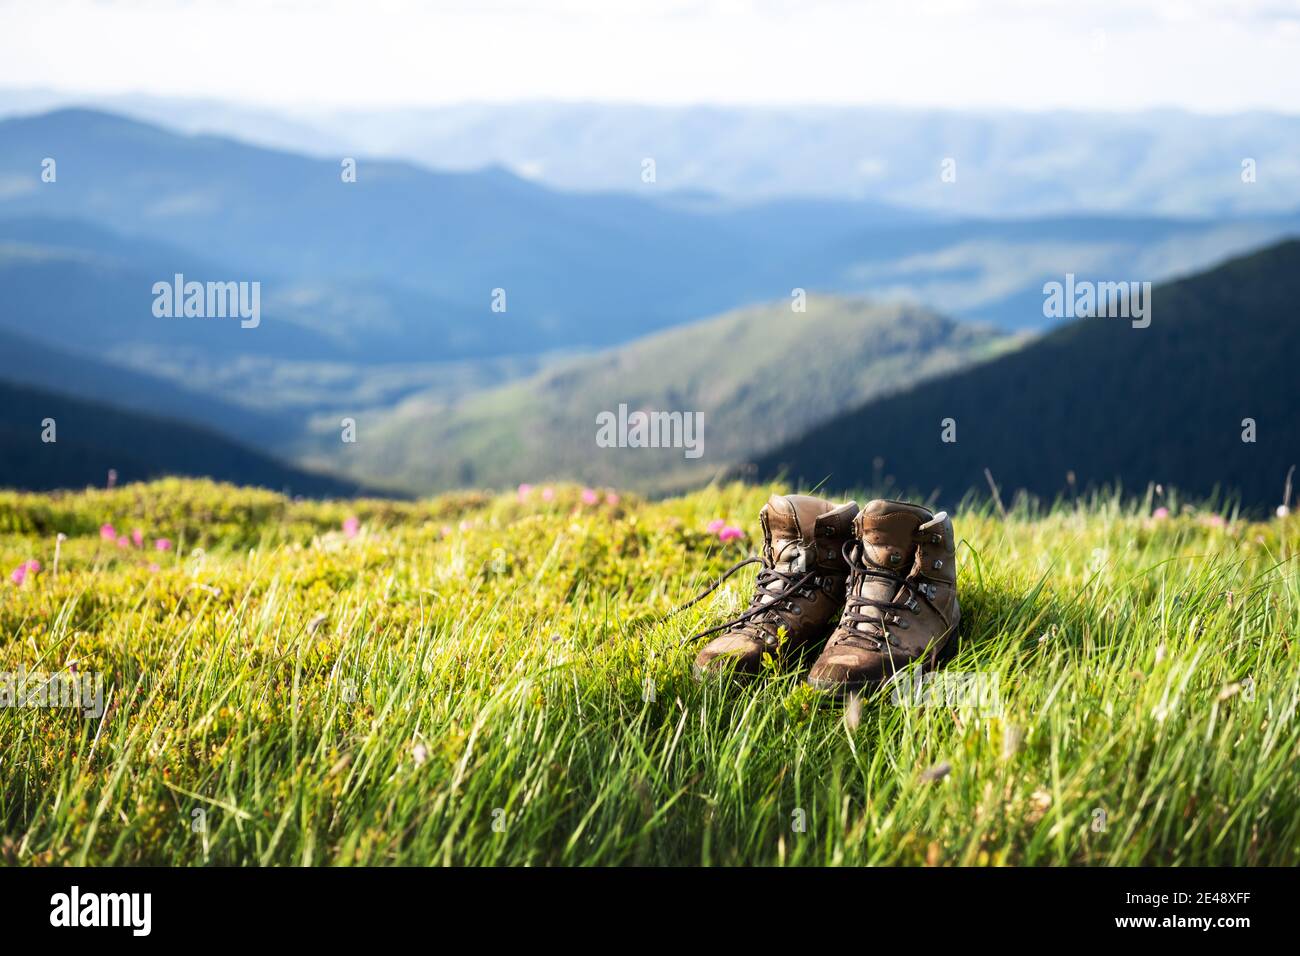 Boots of lonely tourist on lush grass covered mountains hill. Landscape photography Stock Photo